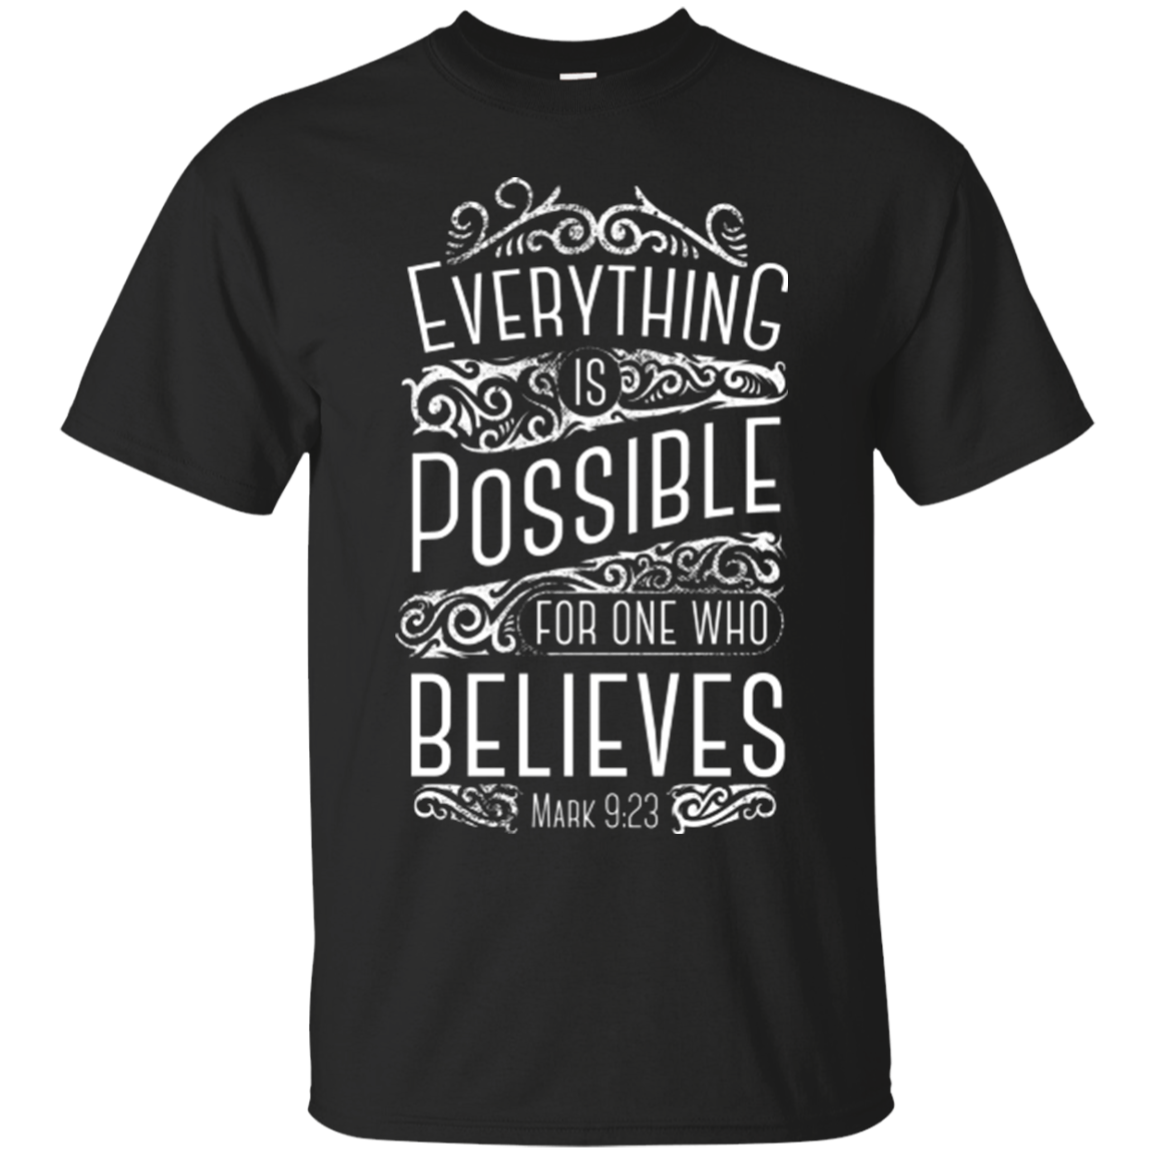 EVERYTHING IS POSSIBLE T-SHIRT